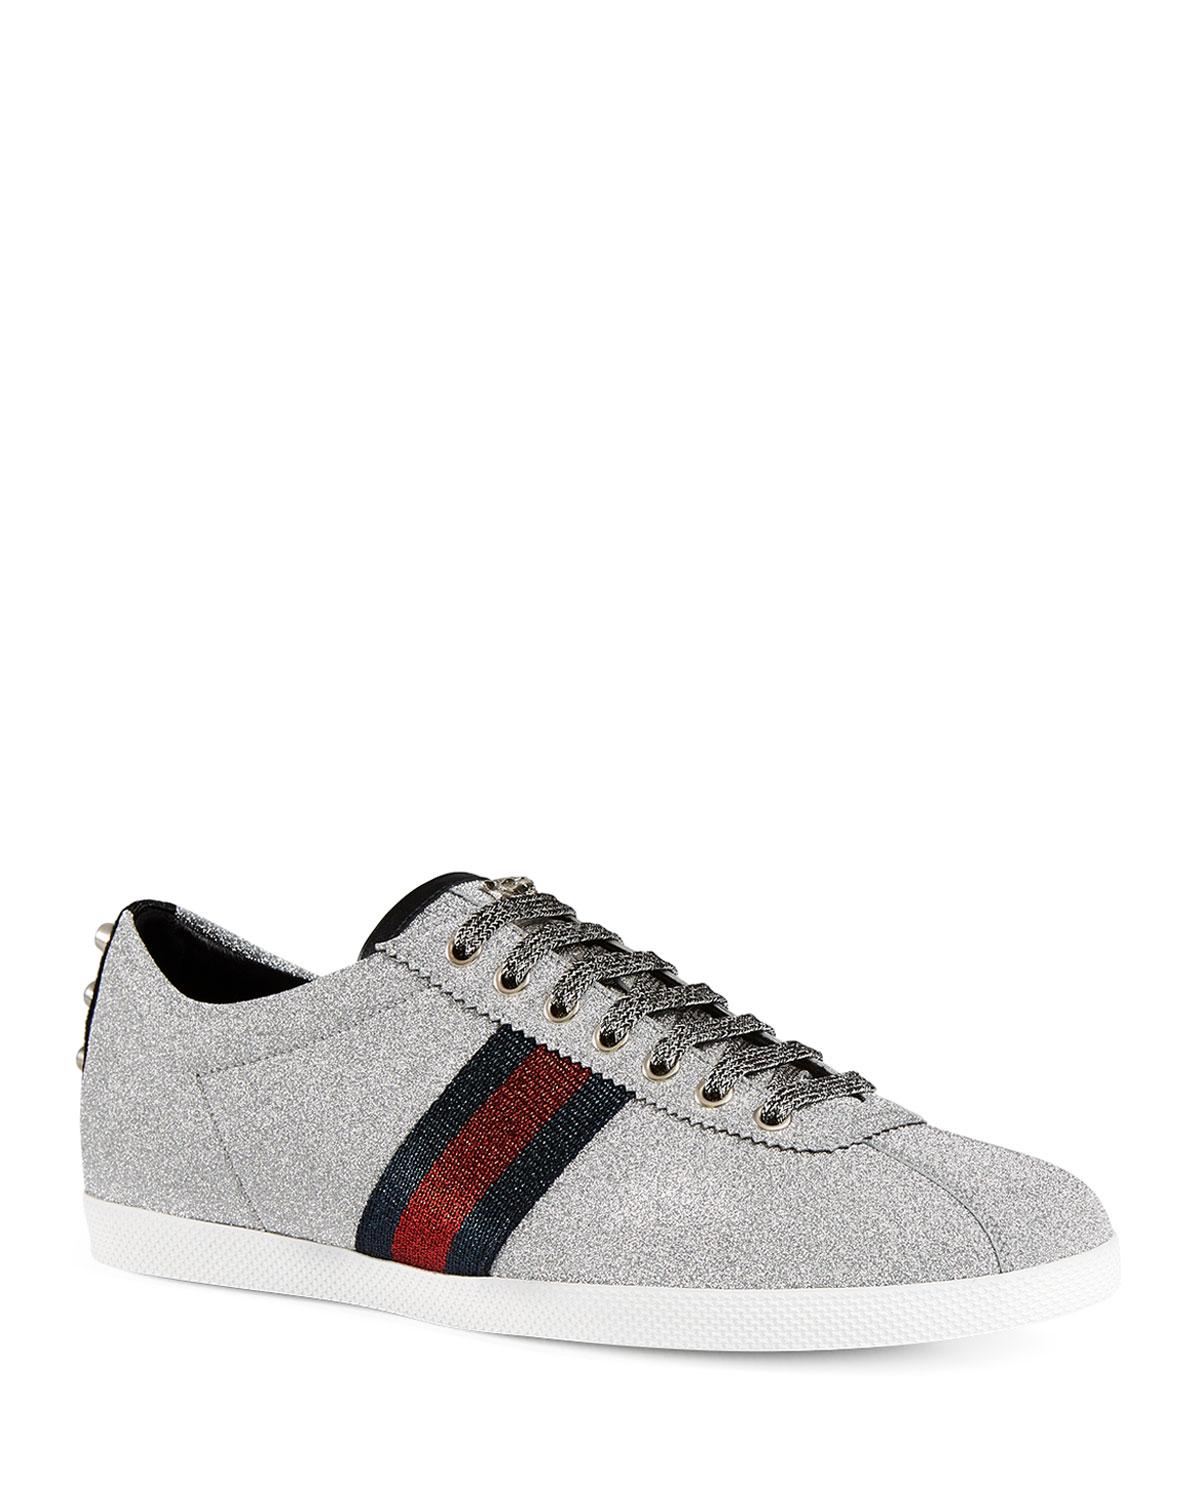 Gucci Denim Men's Bambi Web Low-top Sneakers With Stud Detail in Silver ...